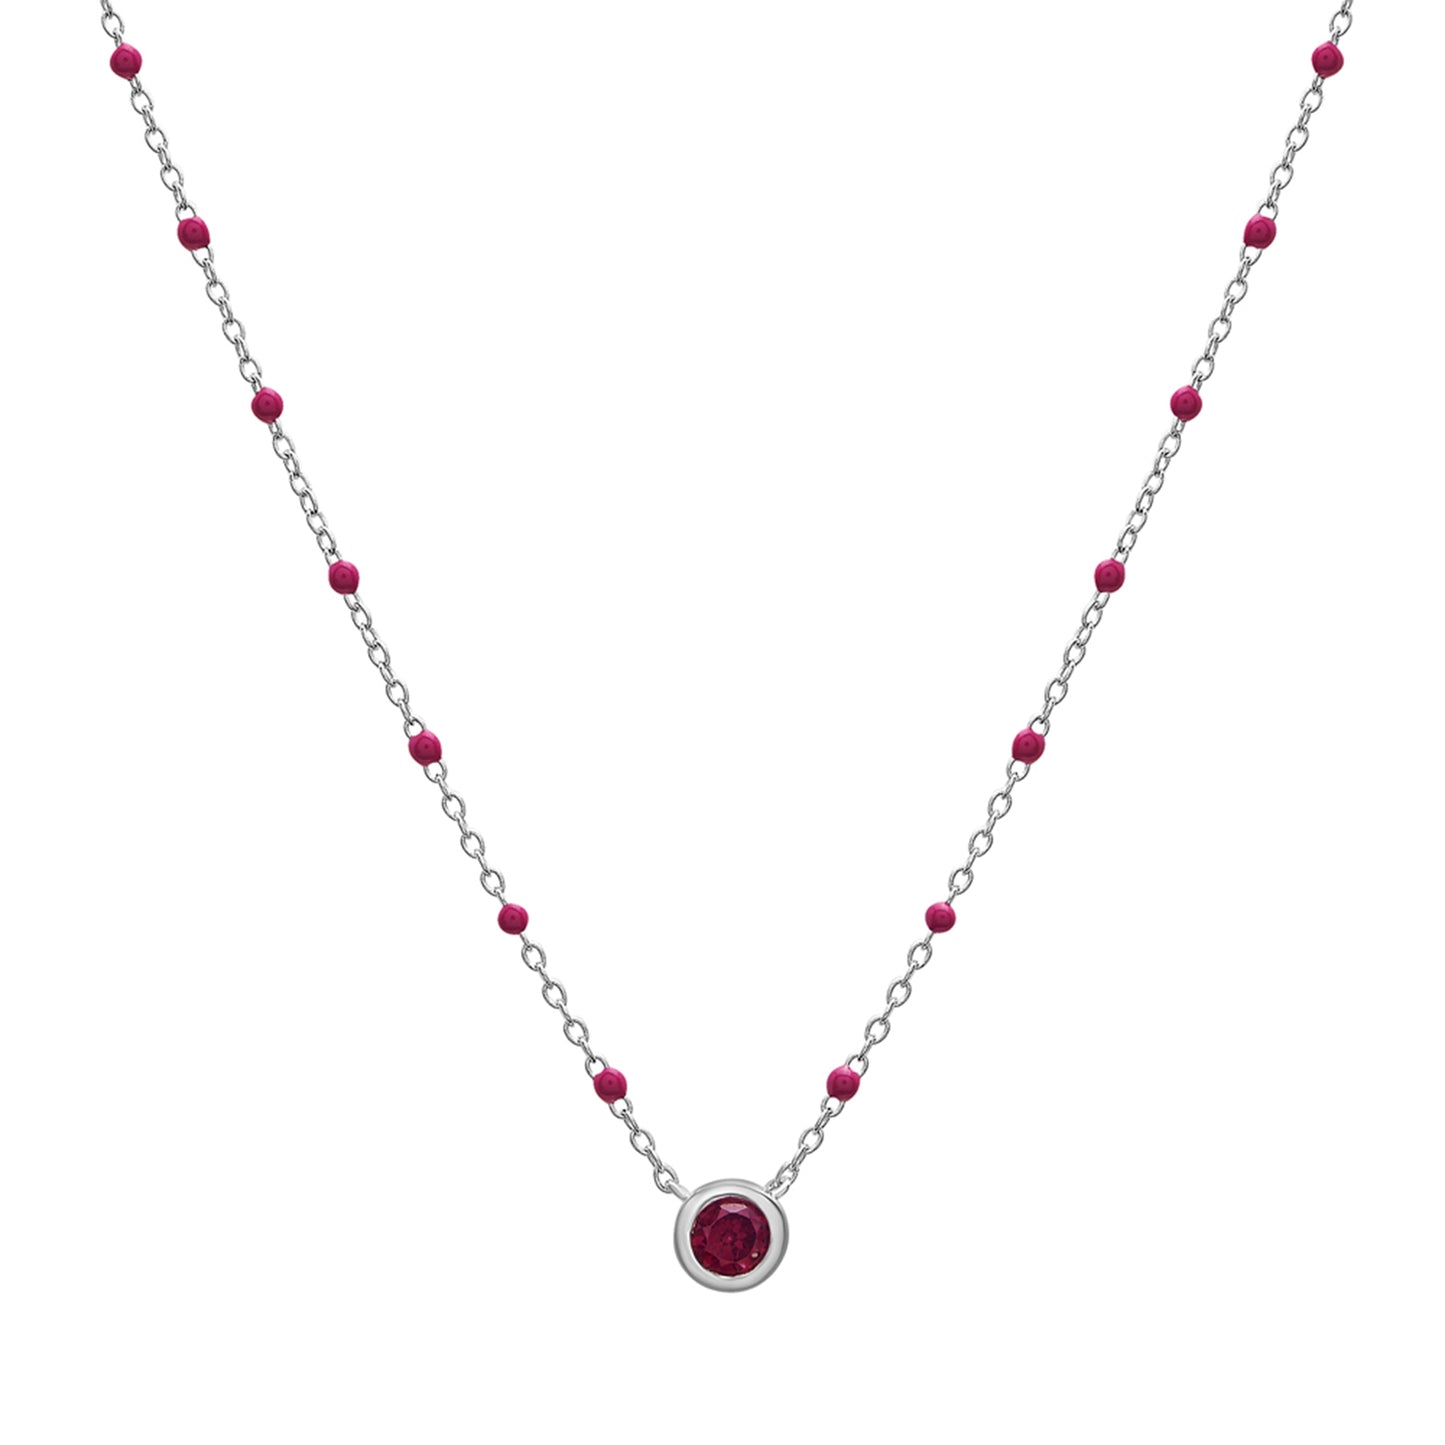 Birthstone Enamel Necklaces in Red stone